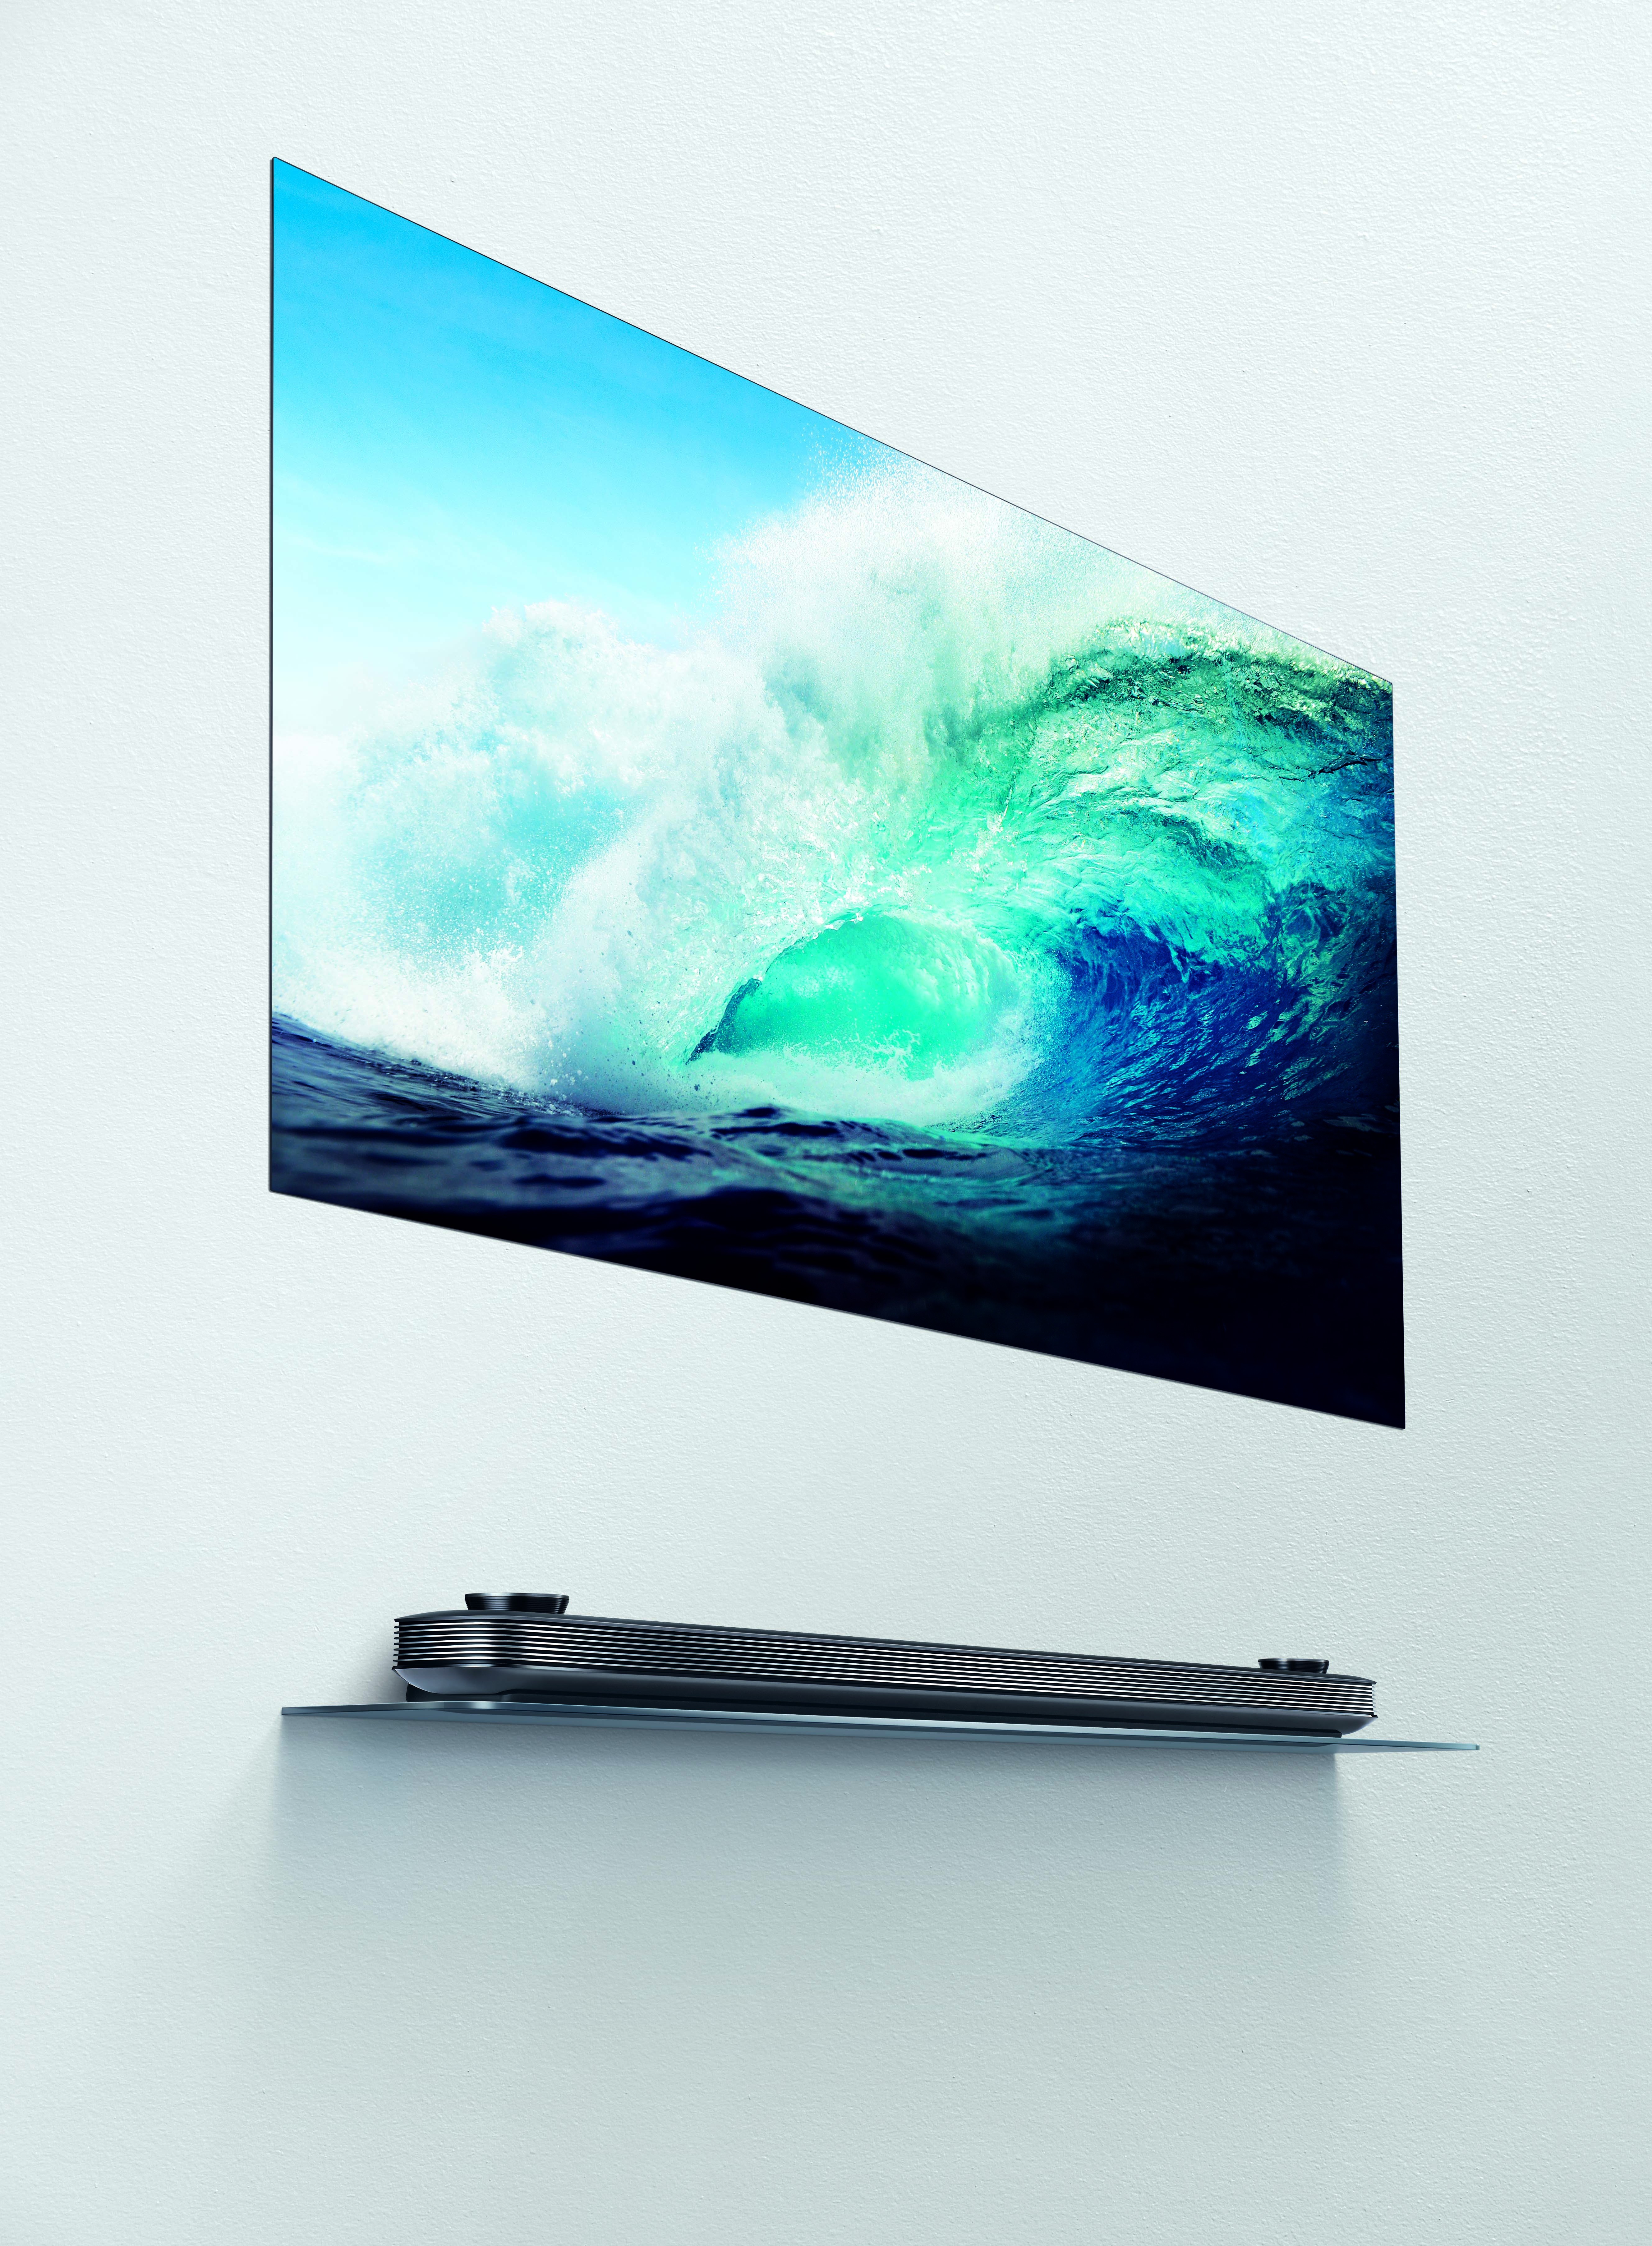 Lg Oled And Lg Super Uhd Tvs Rated As Top Perfomers By Leading Consumer